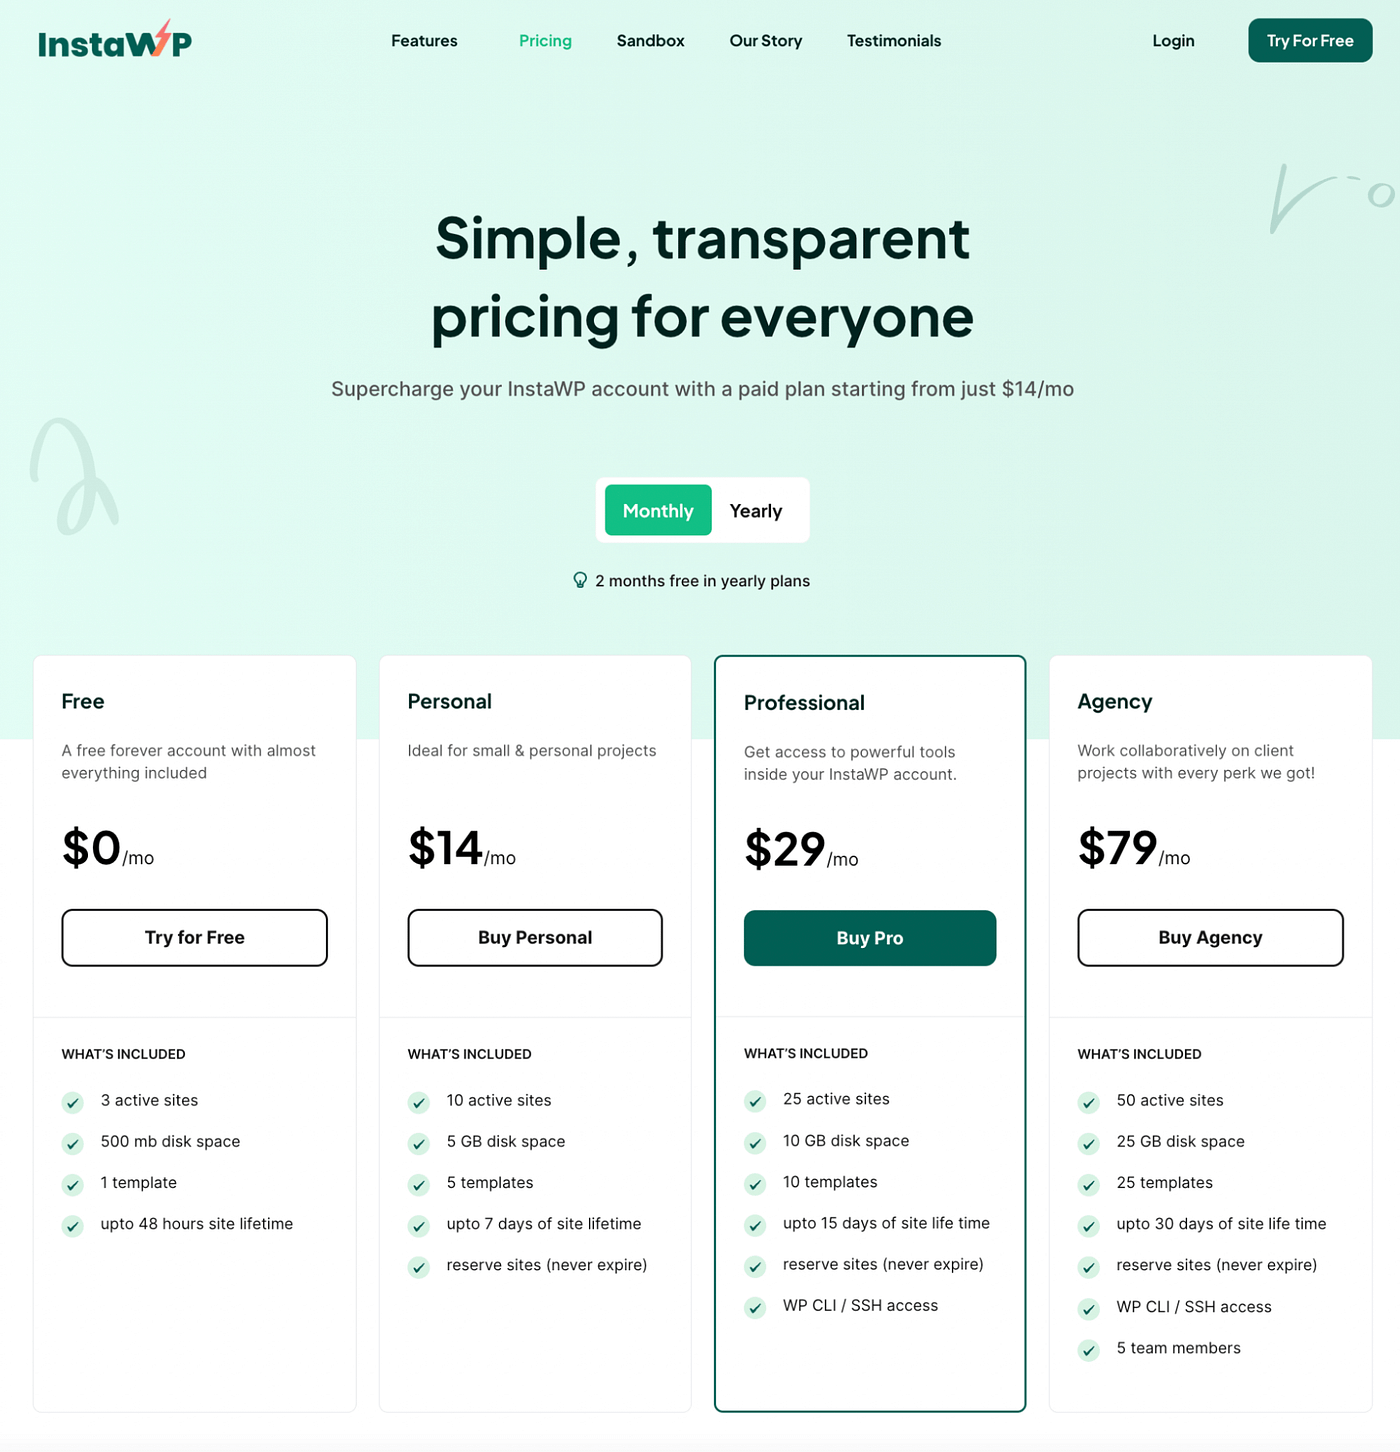 InstaWP review: the pricing